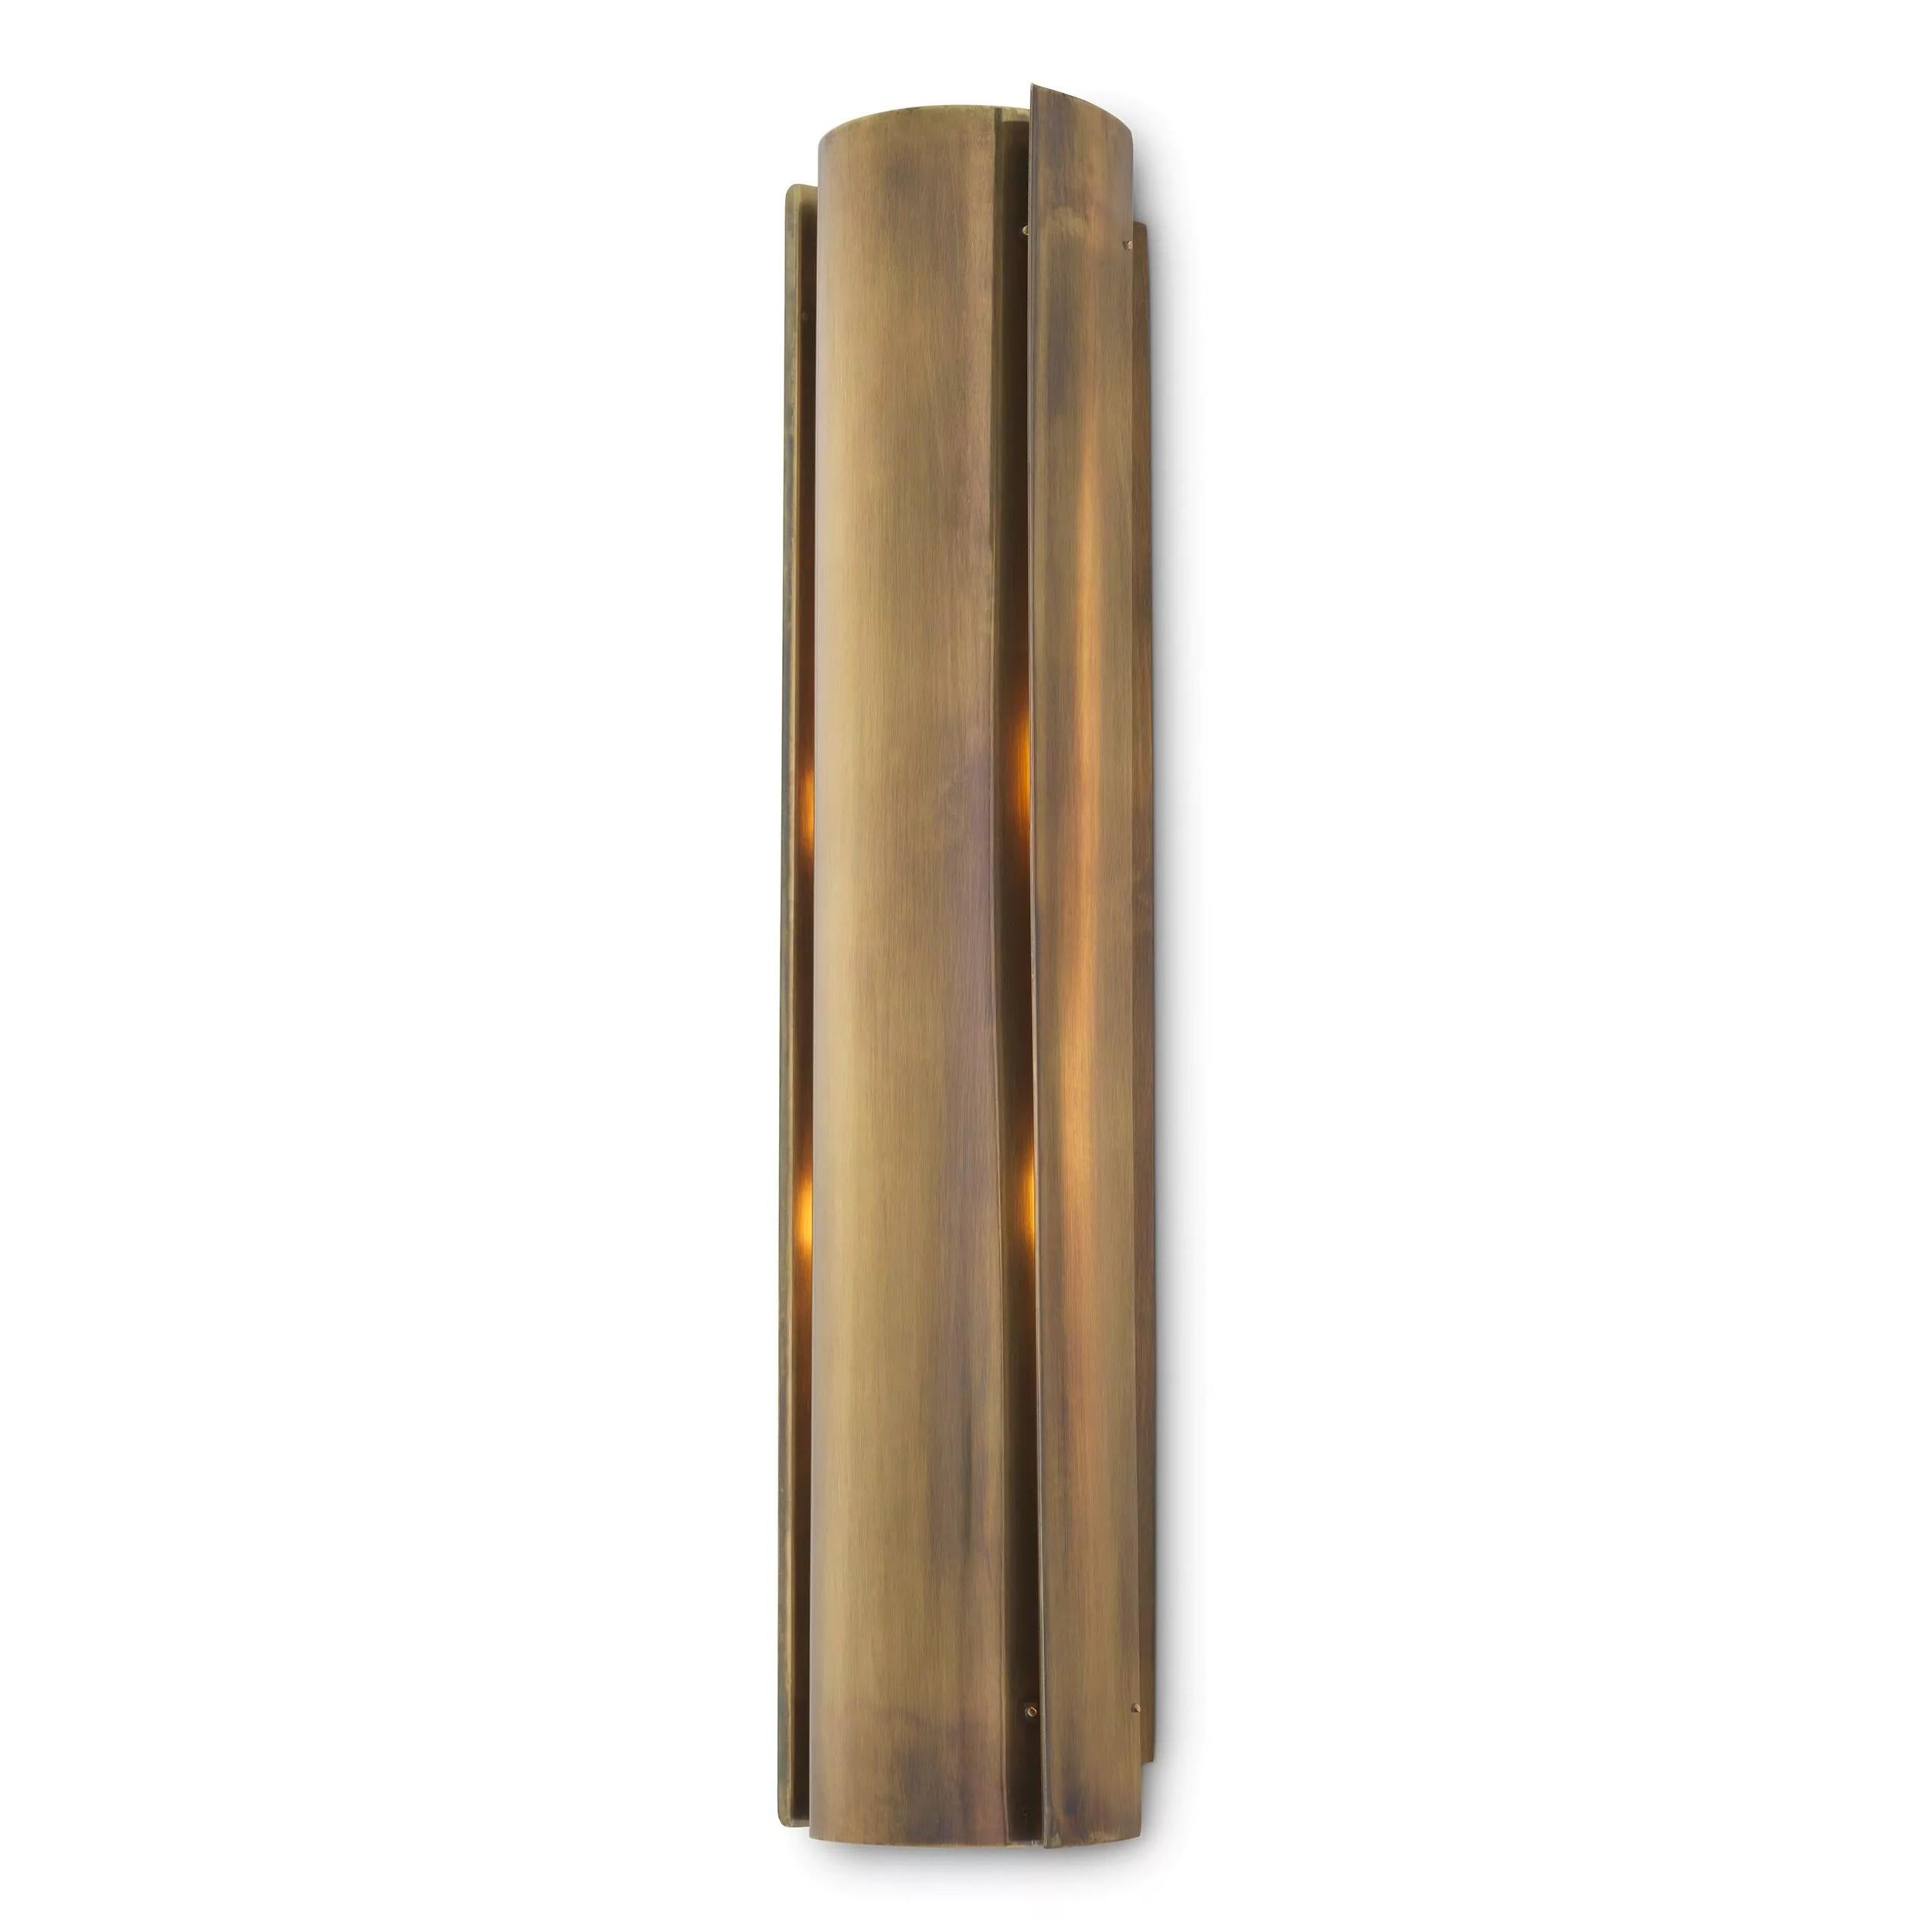 1960s Design and Brutalist style wall light composed of a geometric, graphic and minimalist brass metal base. 2 E27 lightbulbs are required.